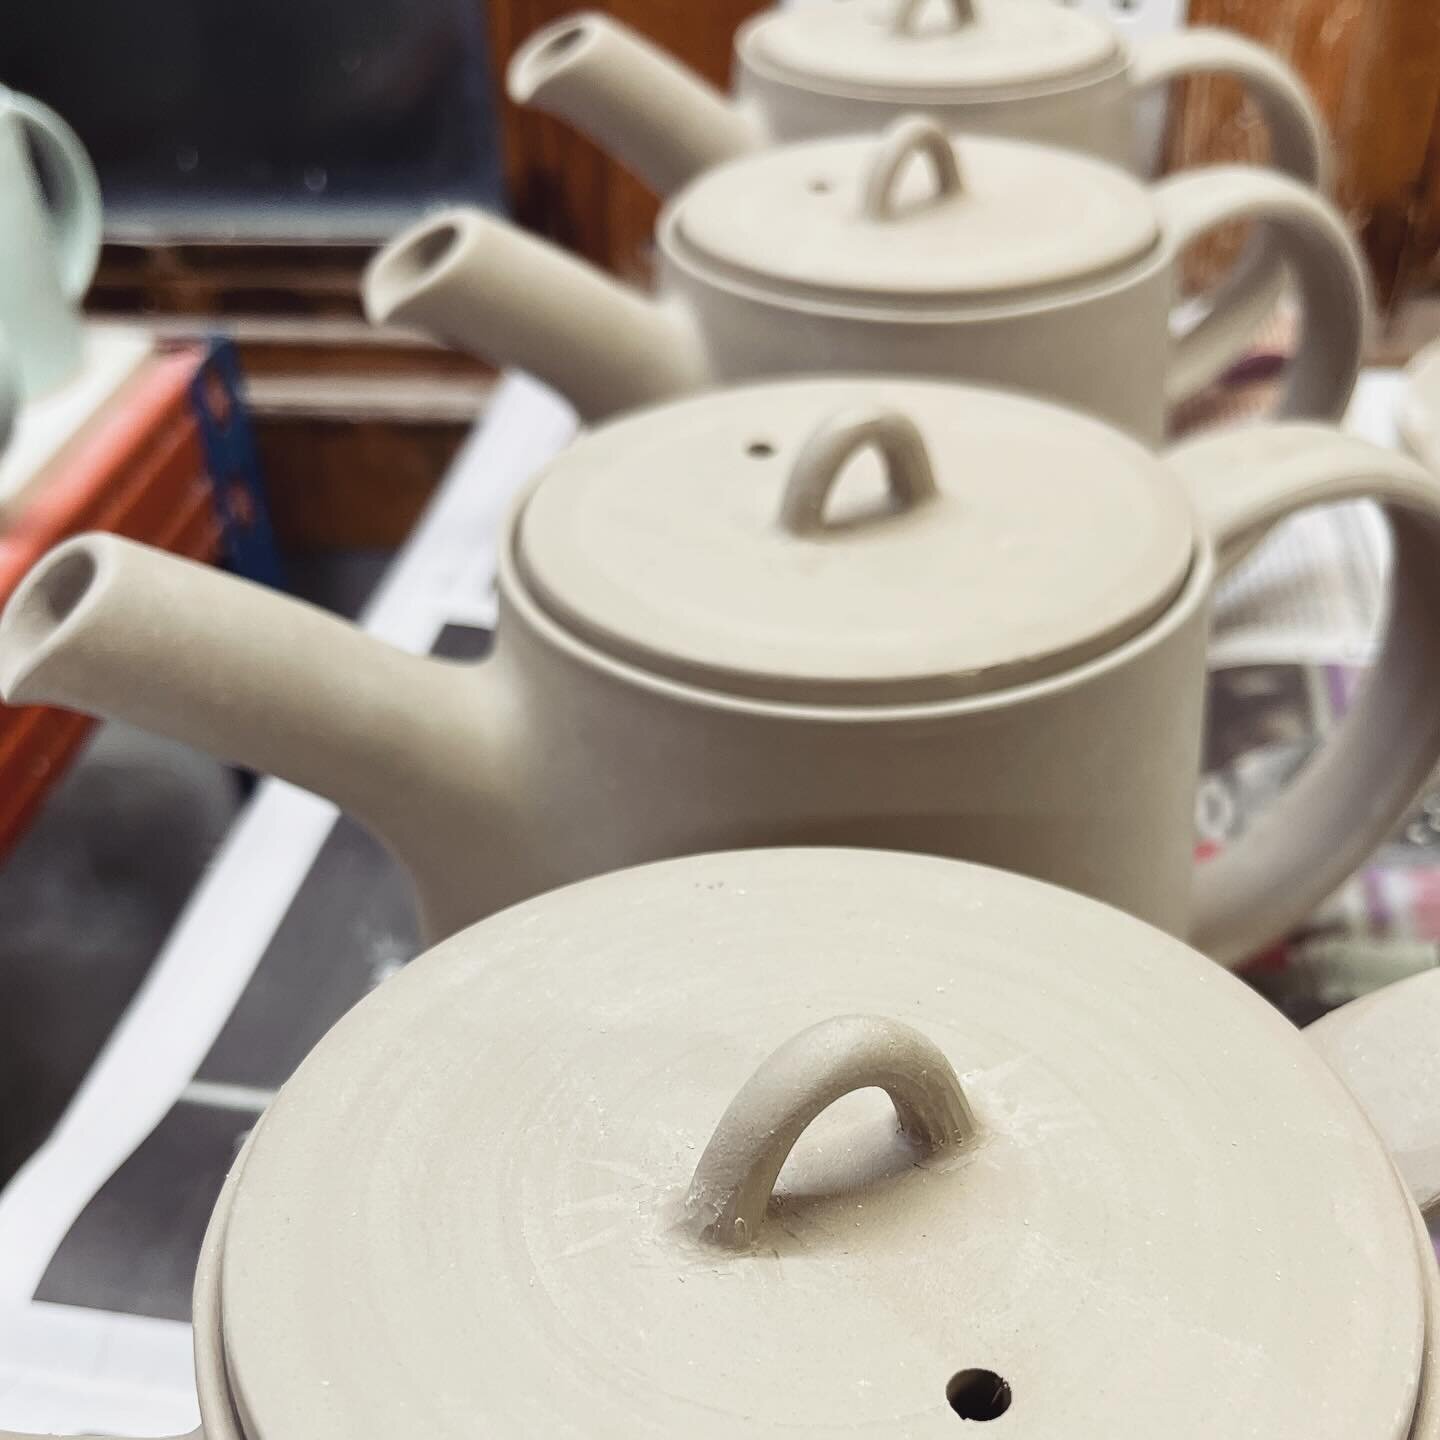 Teapotting today&hellip; hard graft that is. Very satisfying though, all those fiddly bits and technical details. Due to hot studio after a glaze firing I was able to throw and assemble the whole lot today (a loooong day). 

#teapot #handmadeteapot #